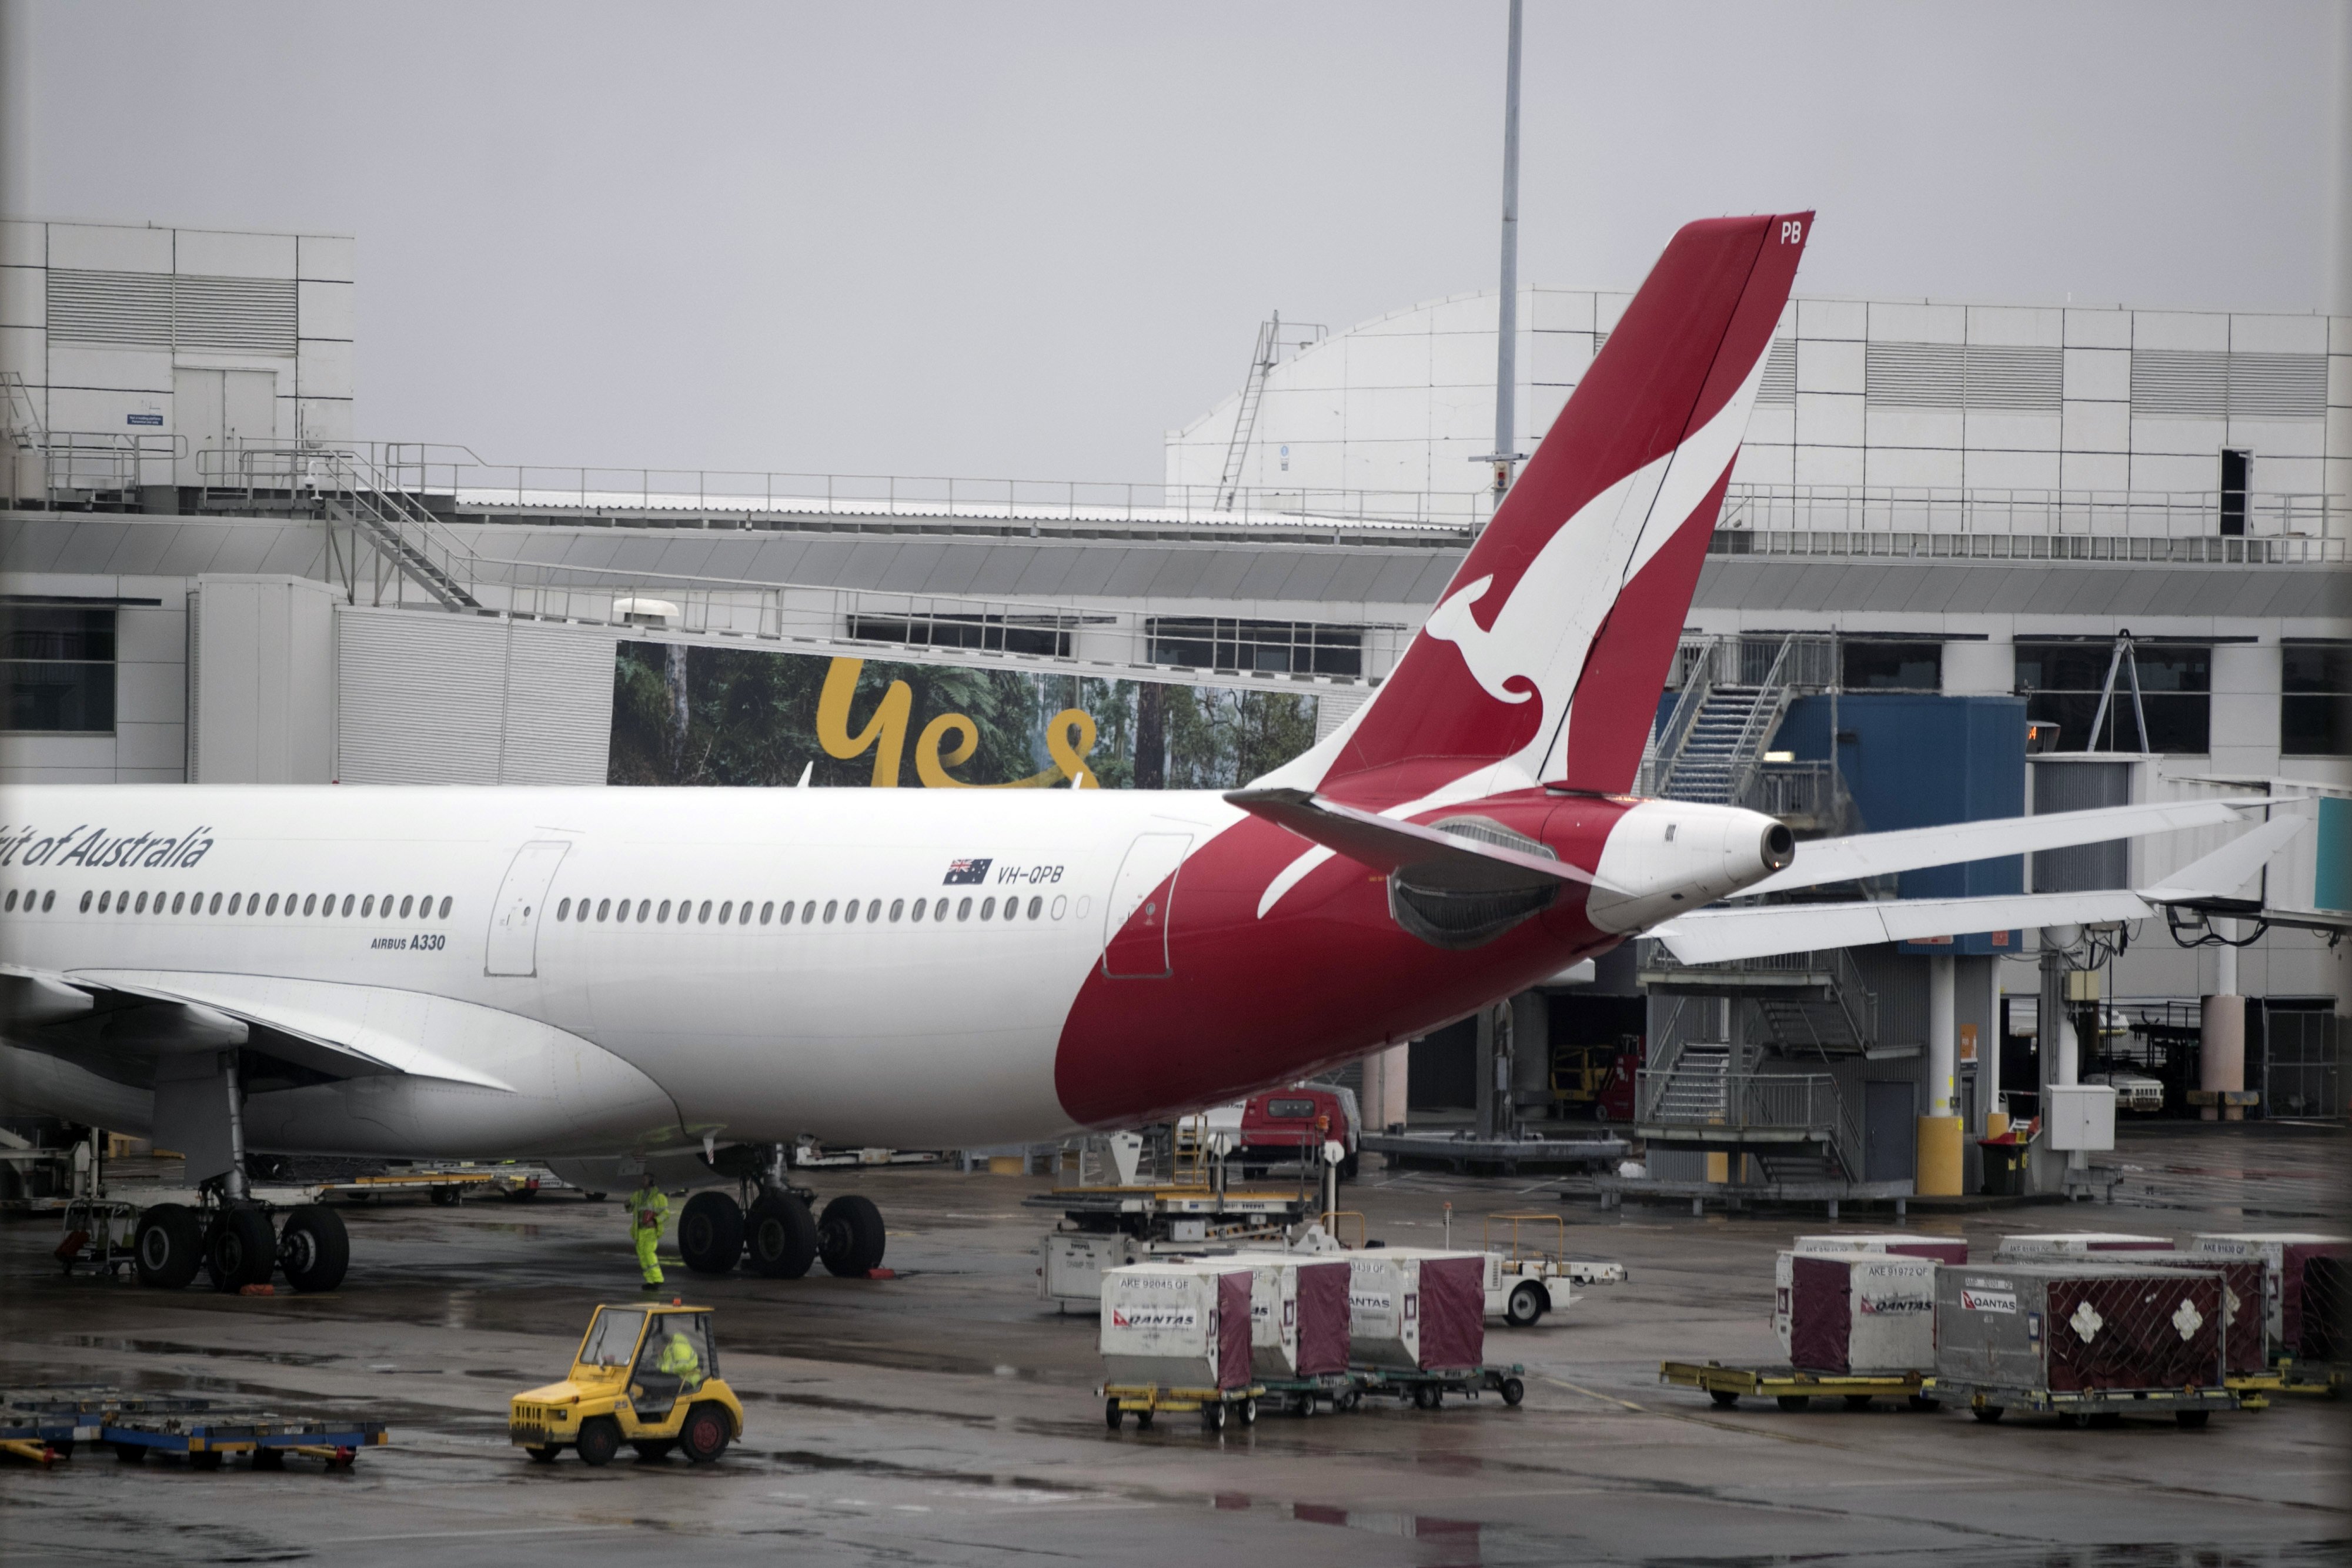 A Qantas Airways Ltd. aircraft on the tarmac at Sydney Airport in Sydney, Australia, on Wednesday, July 6, 2022 | Source: Getty Images